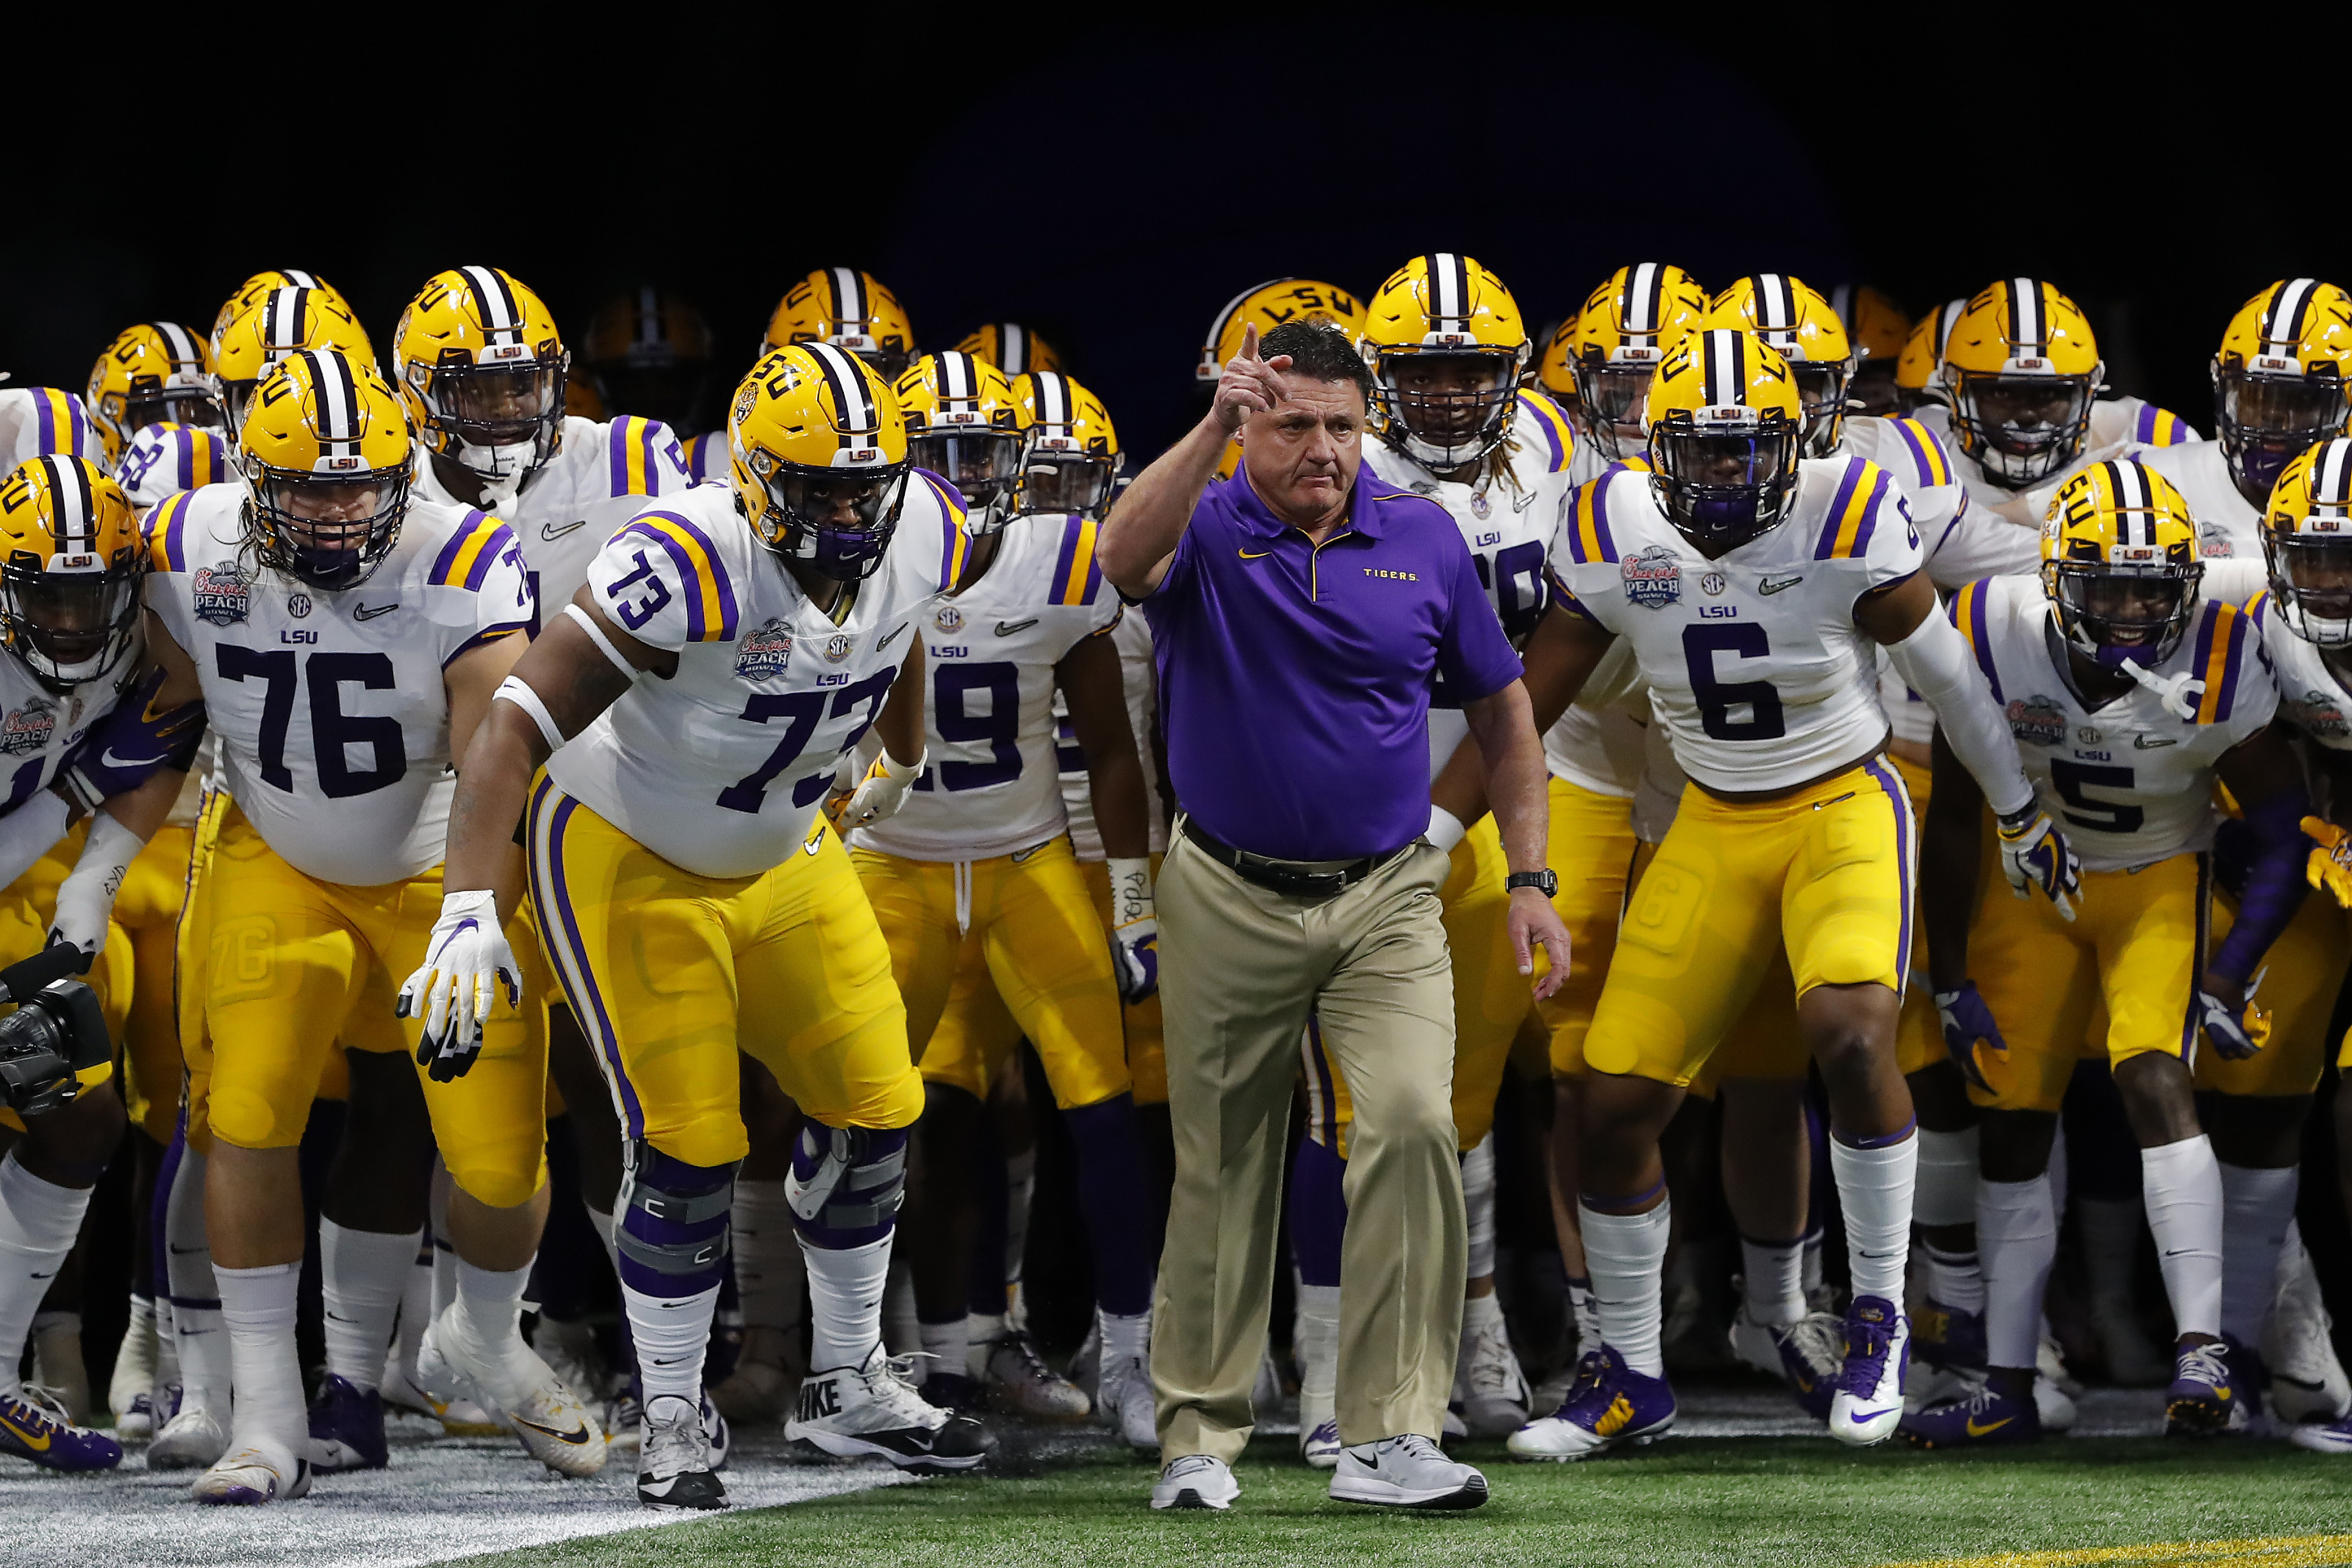 Clemson Football: New Orleans will be token home game for LSU